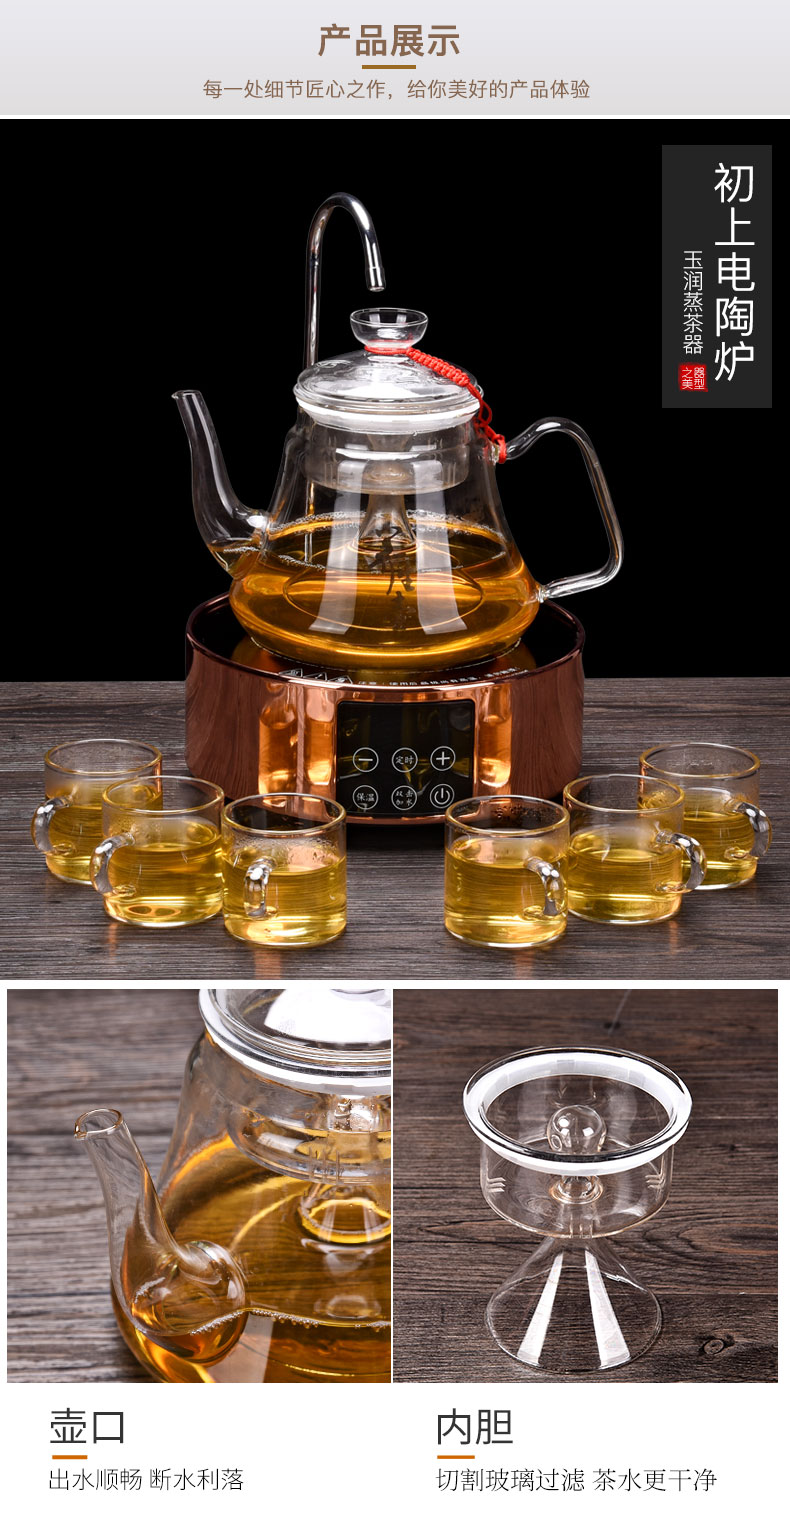 HaoFeng electric TaoLu boiled tea, heat resistant black crystal plate thickening glass teapot the boiled tea, the electric TaoLu suits for